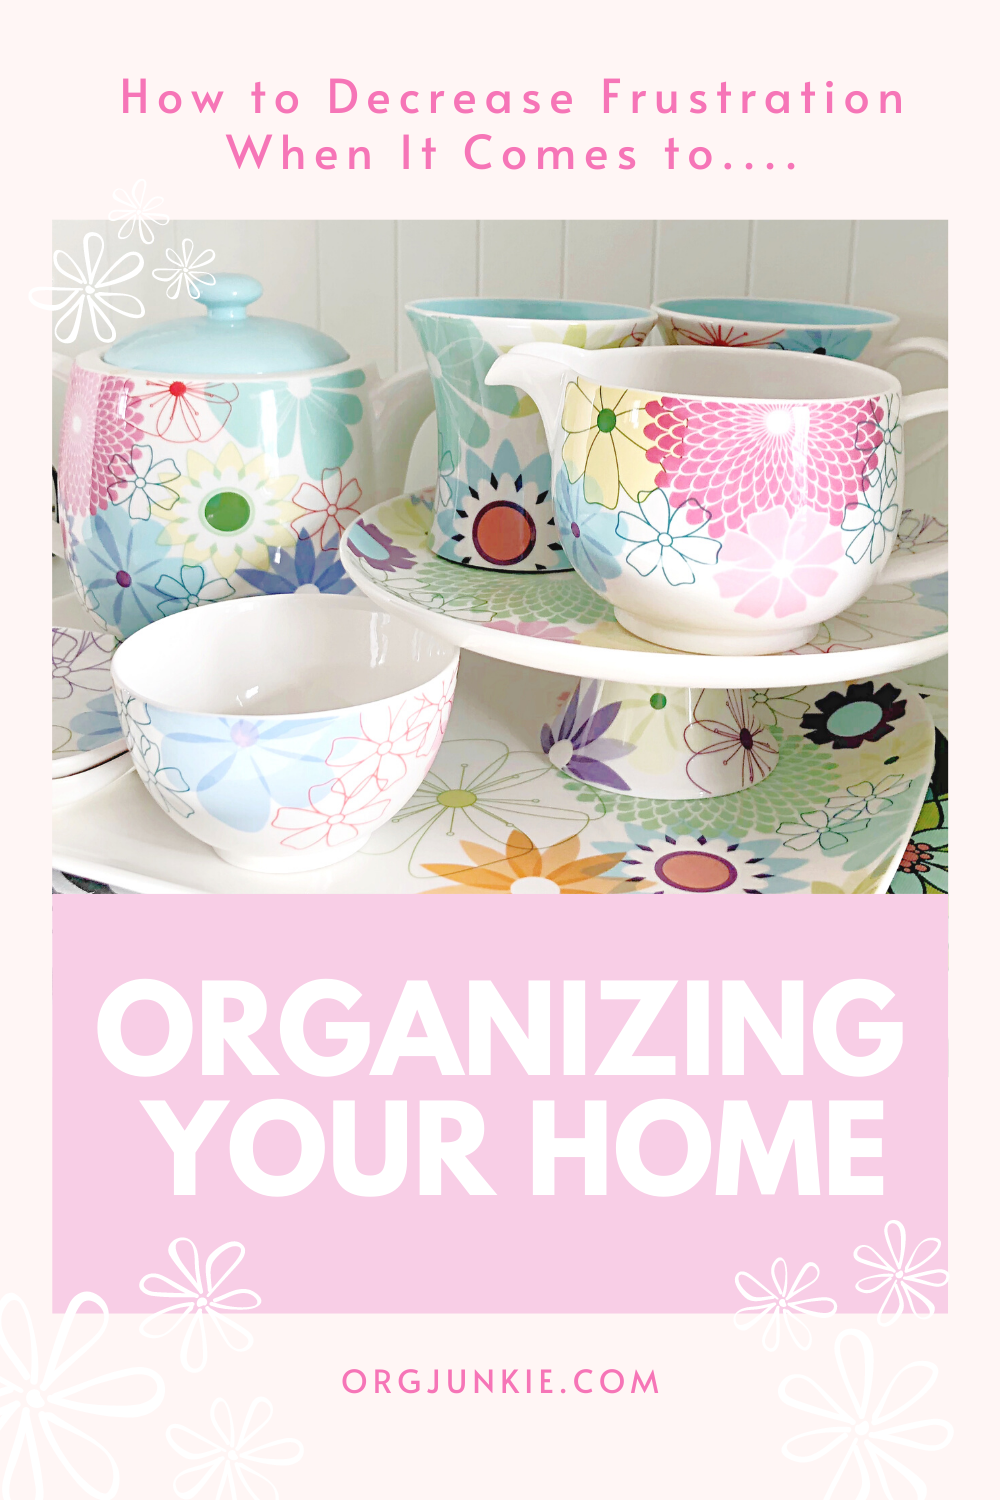 How to Decrease Frustration When It Comes to Organizing Your Home at I'm an Organizing Junkie blog